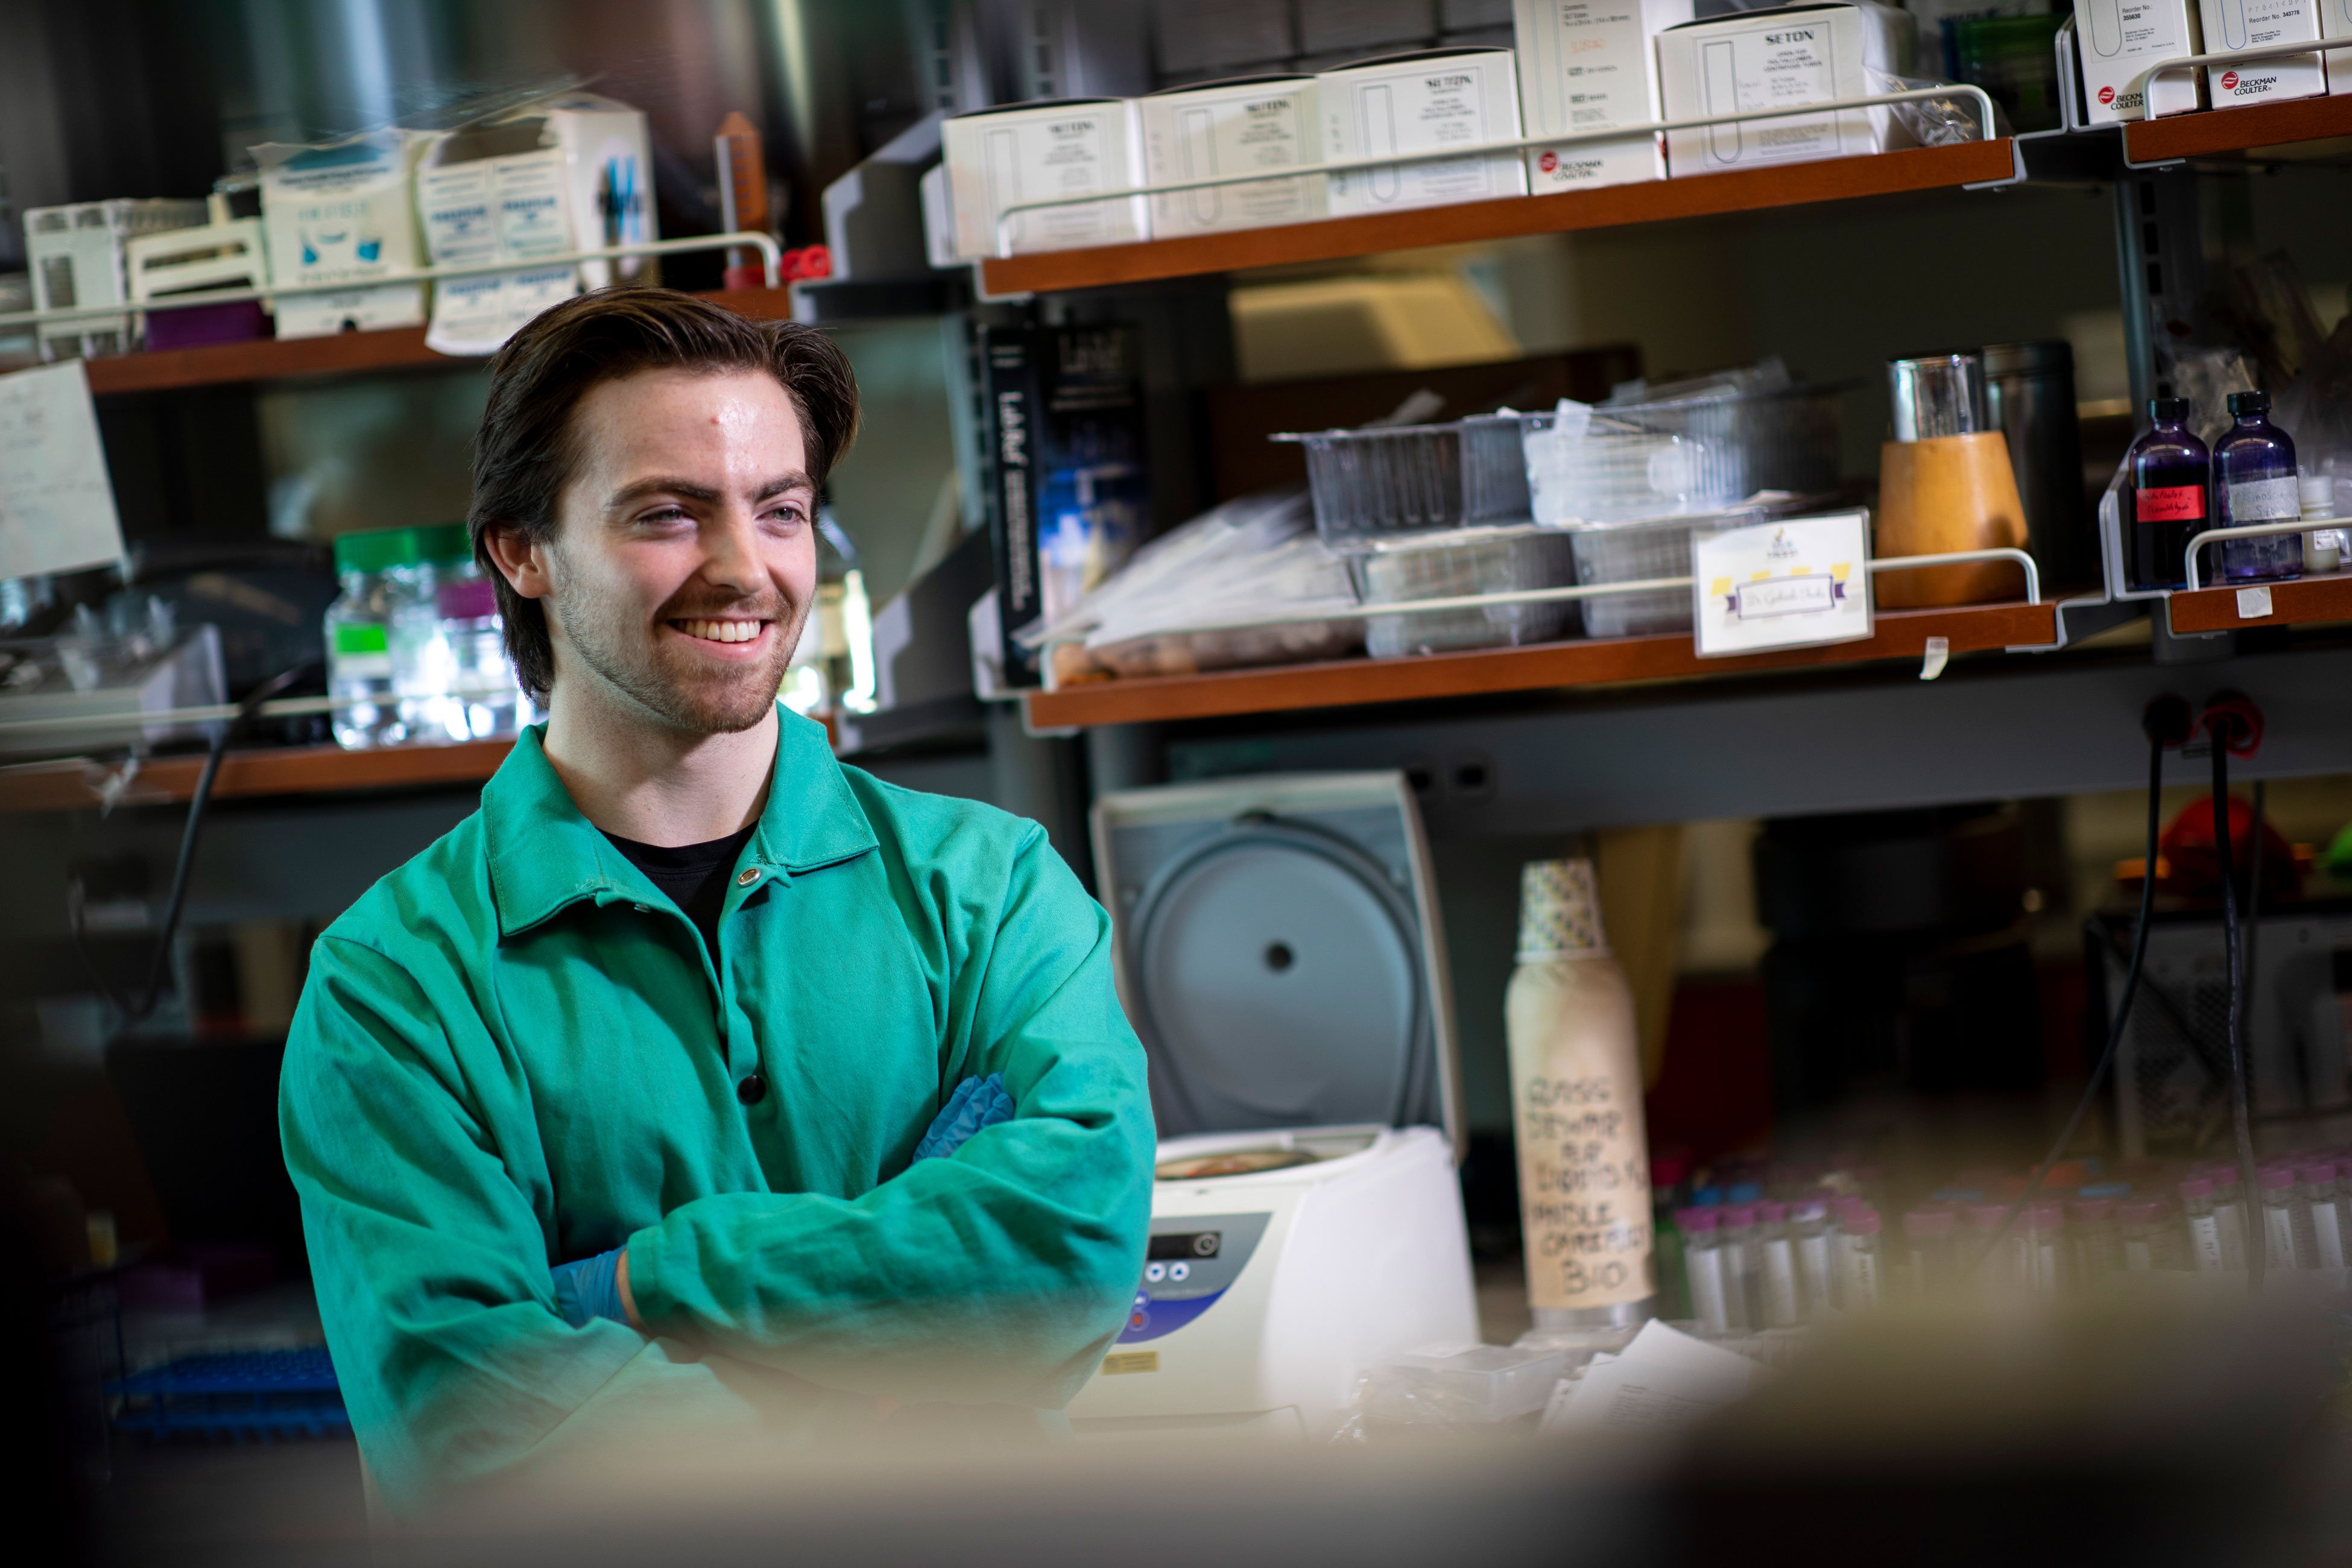 A student in a green lab coat inside a biology laboratory crosses his arms and smiles as he poses for a photo.